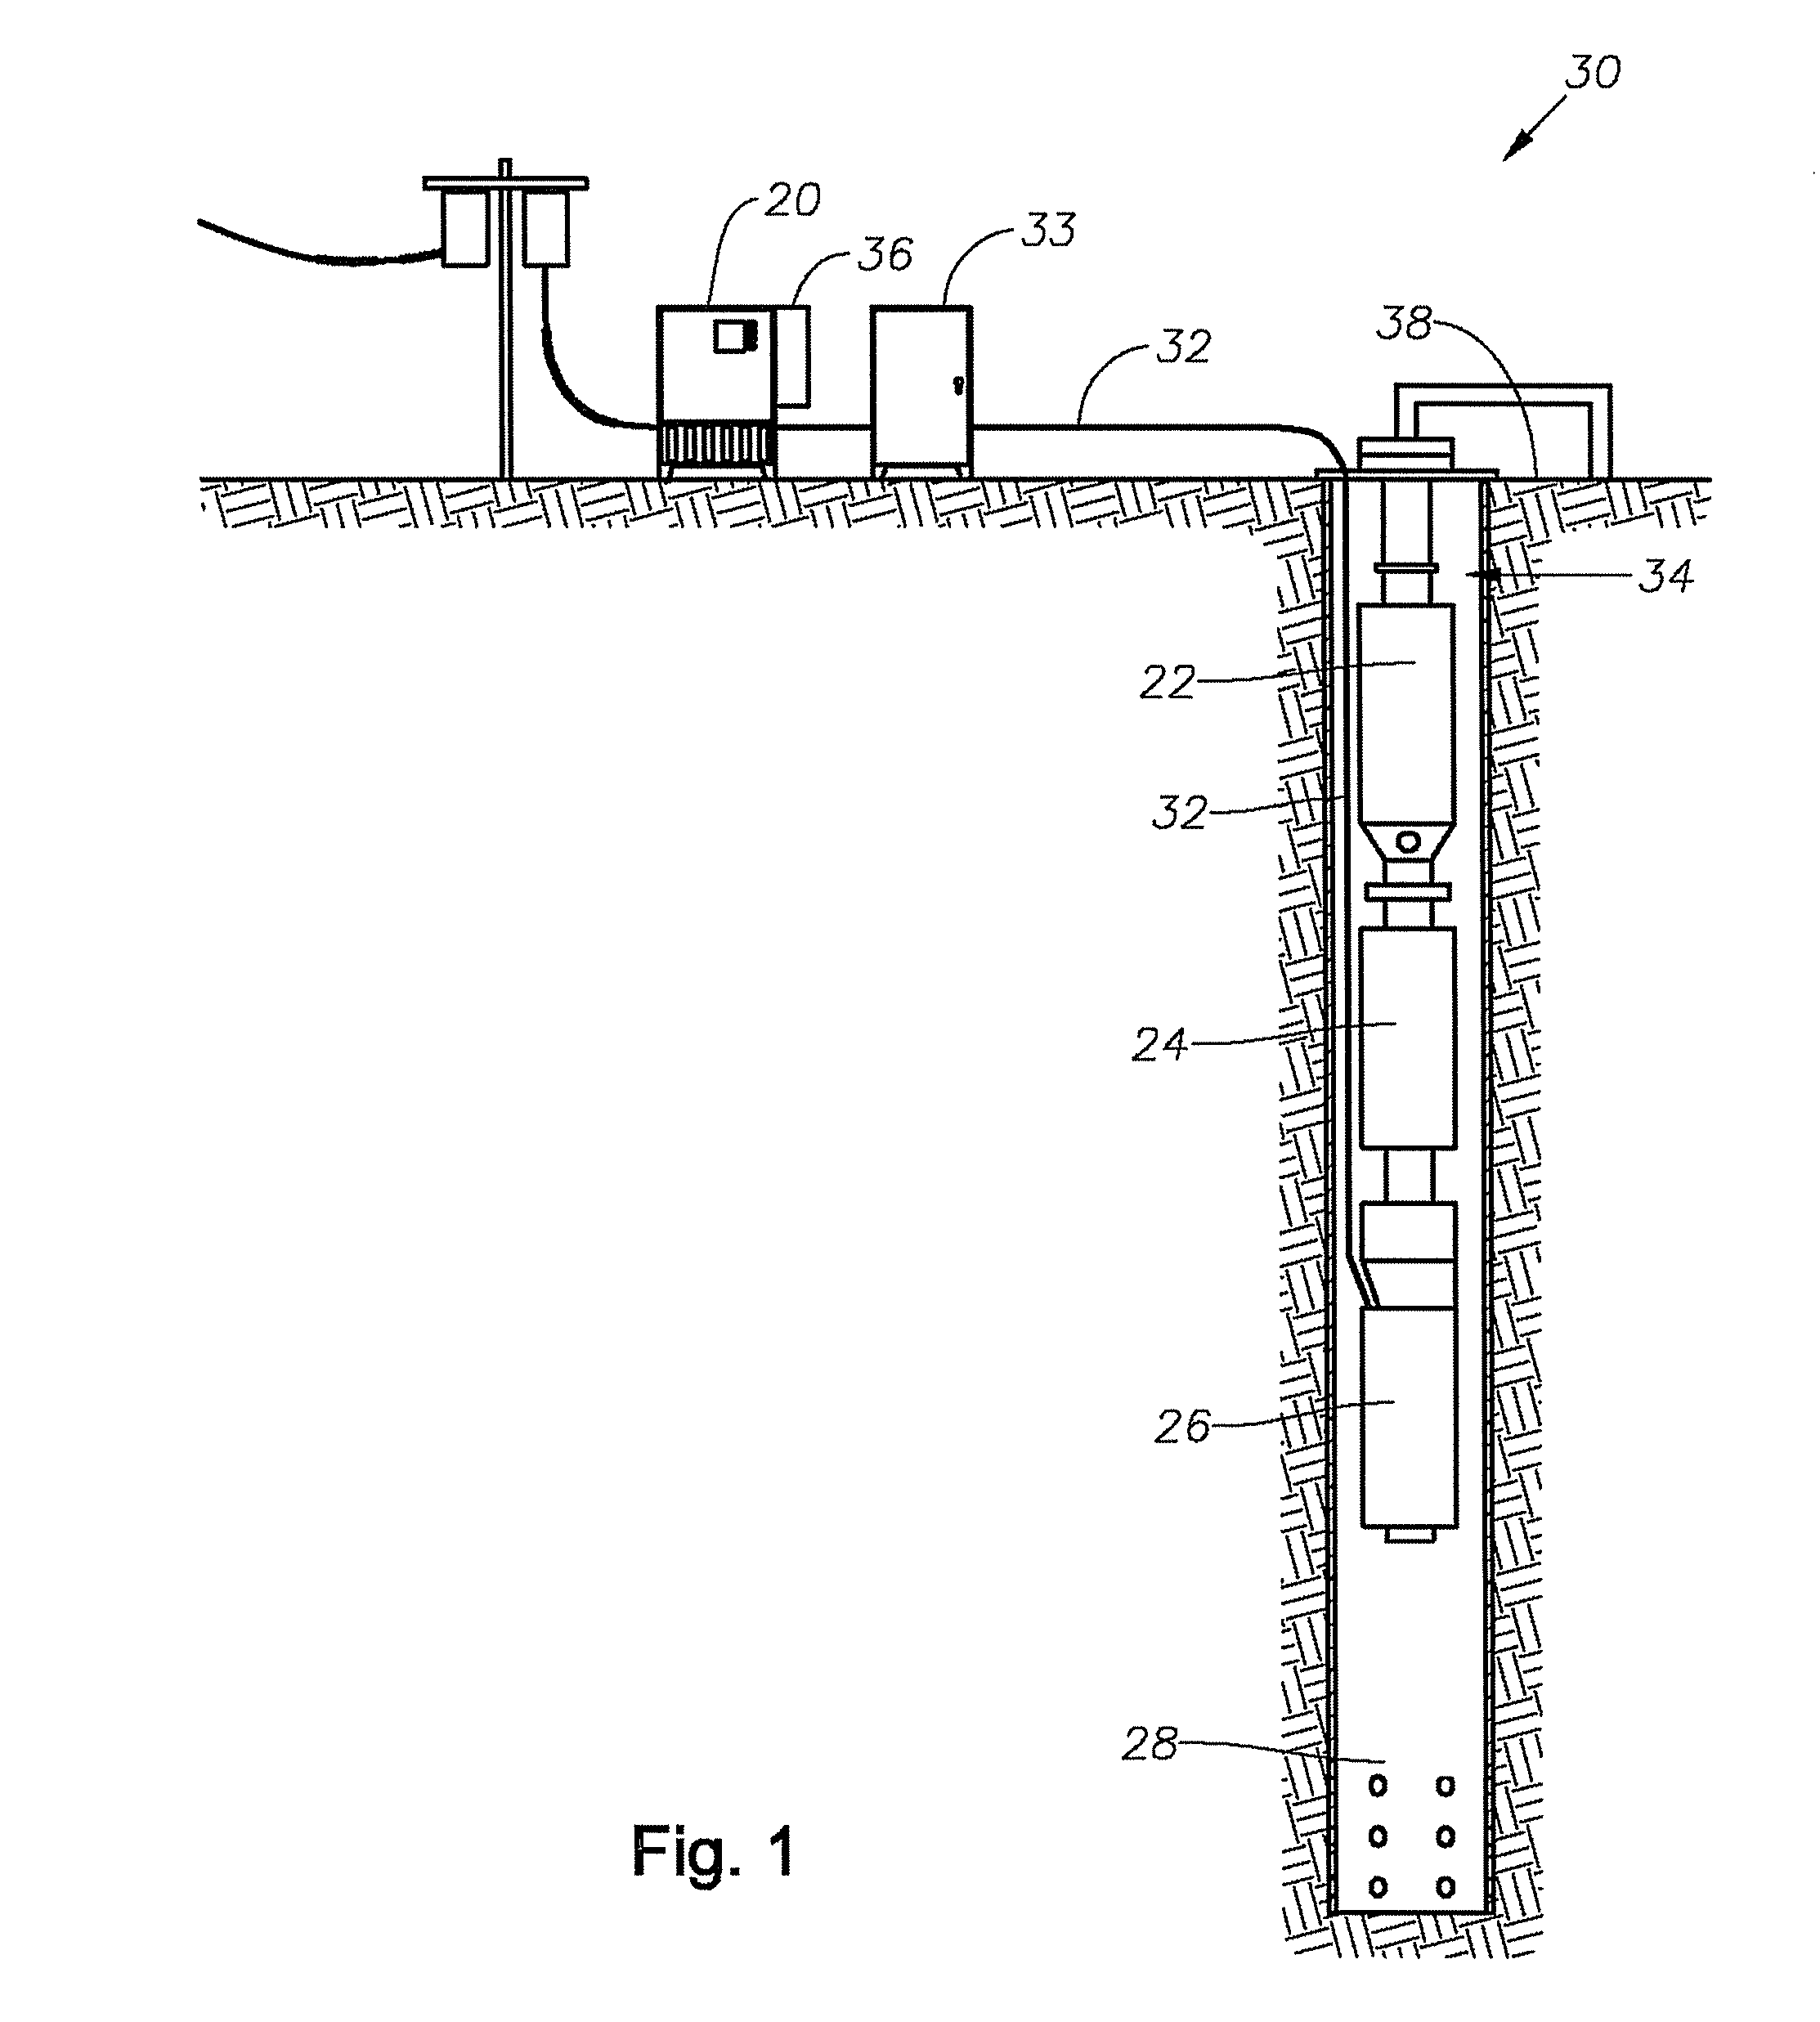 System, method and program product for cable loss compensation in an electrical submersible pump system